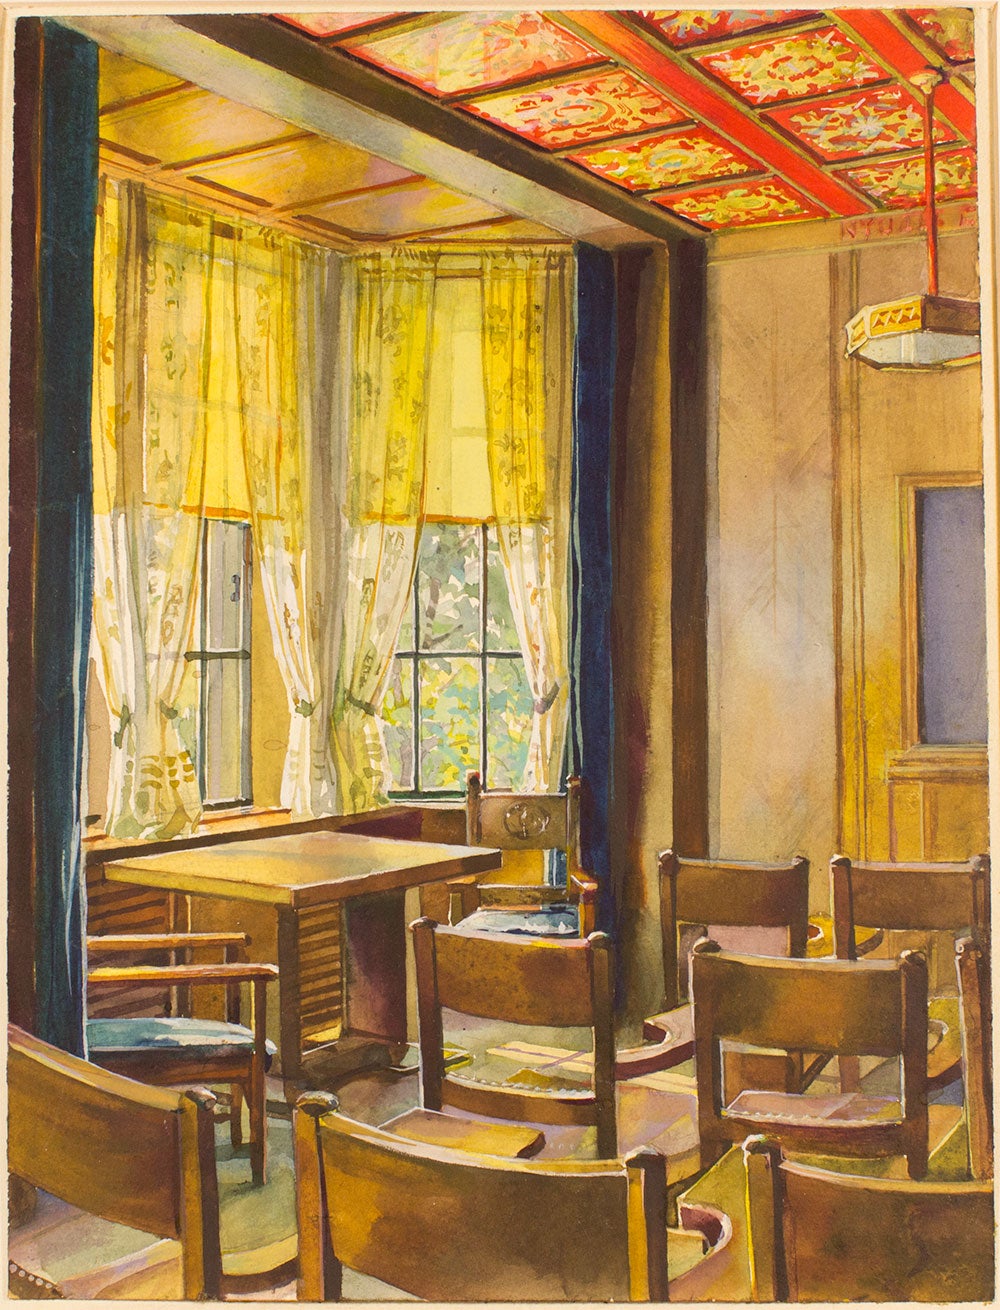 University Art Gallery Exhibition Narratives of the Nationality Rooms: Immigration and Identity in Pittsburgh